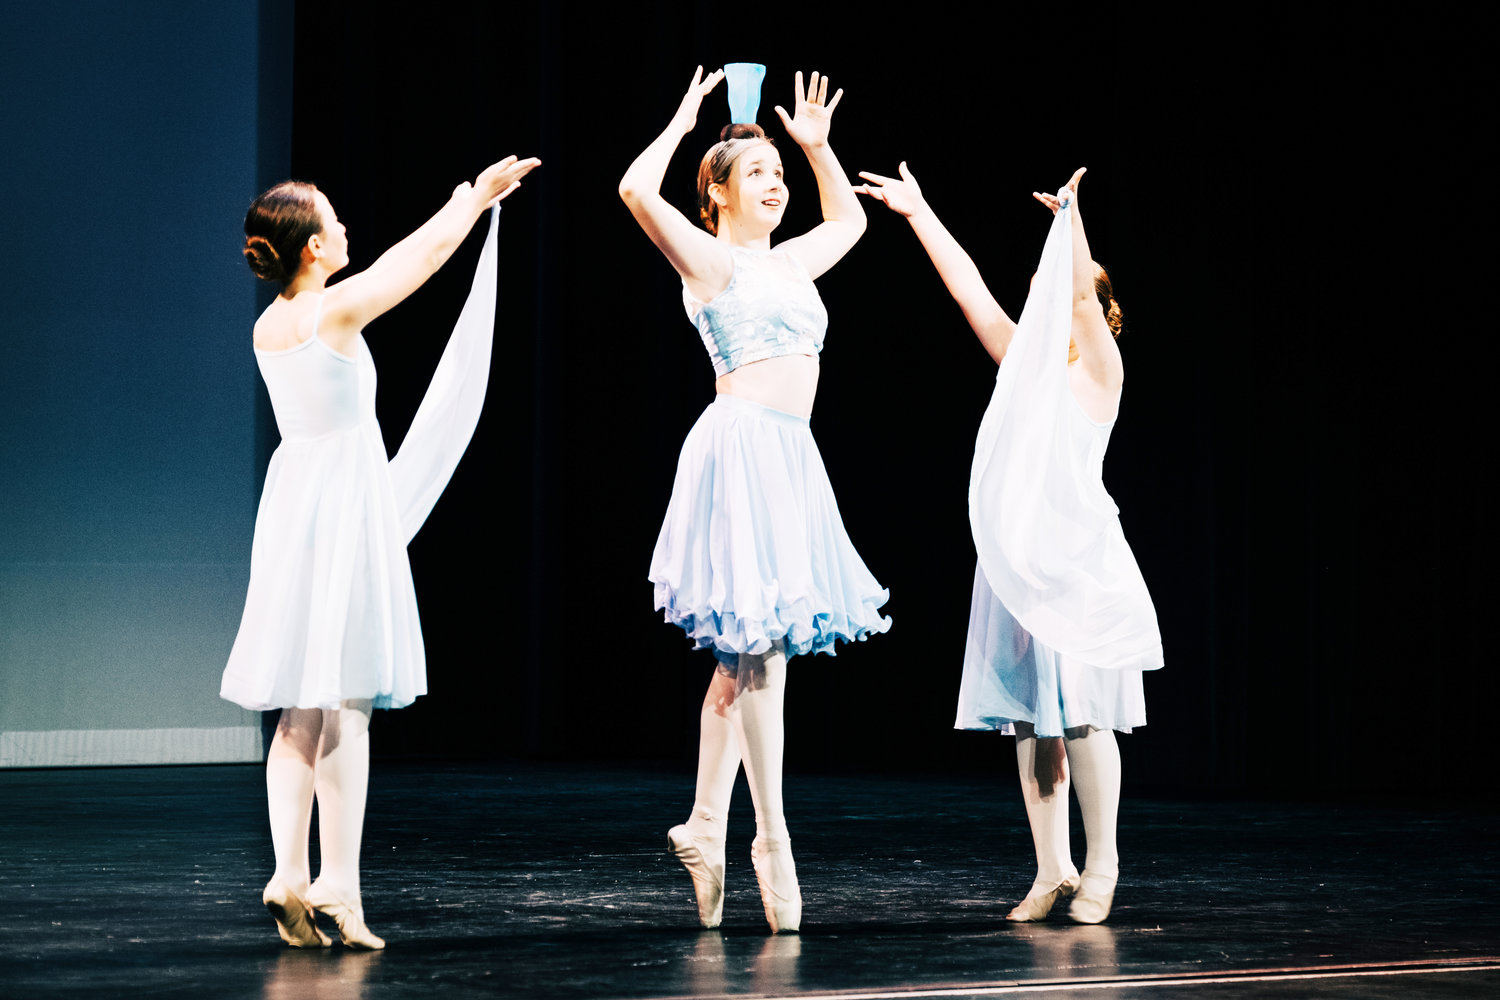 Pittsburg Ballet students Kayla Hutchison, Bailey Wilkes and Scarlet Mccullough perform “La Bayadere Danse Manu” as choreographed by Marius Petipa as part of Pittsburg Ballet’s Spring Showcase at Memorial Auditorium on Thursday.